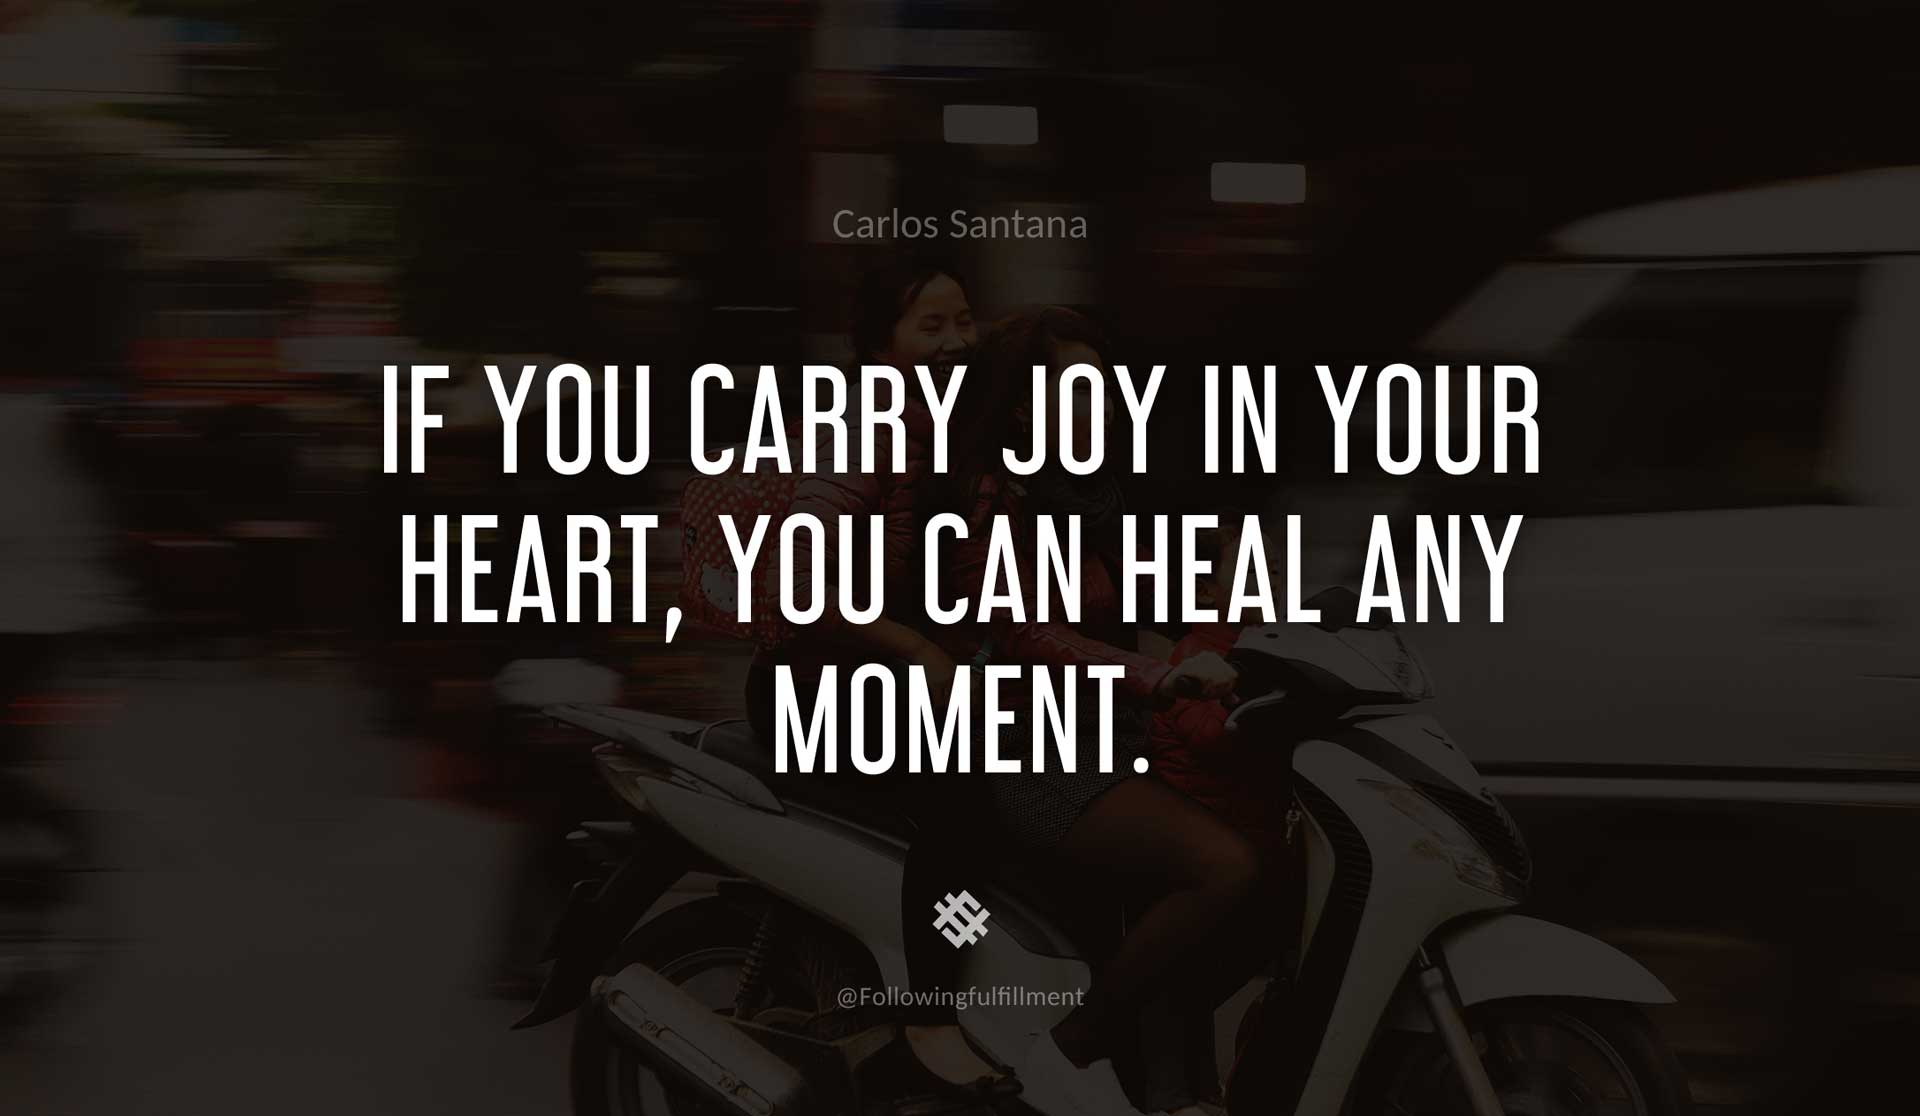 If-you-carry-joy-in-your-heart,-you-can-heal-any-moment.-CARLOS-SANTANA-Quote.jpg